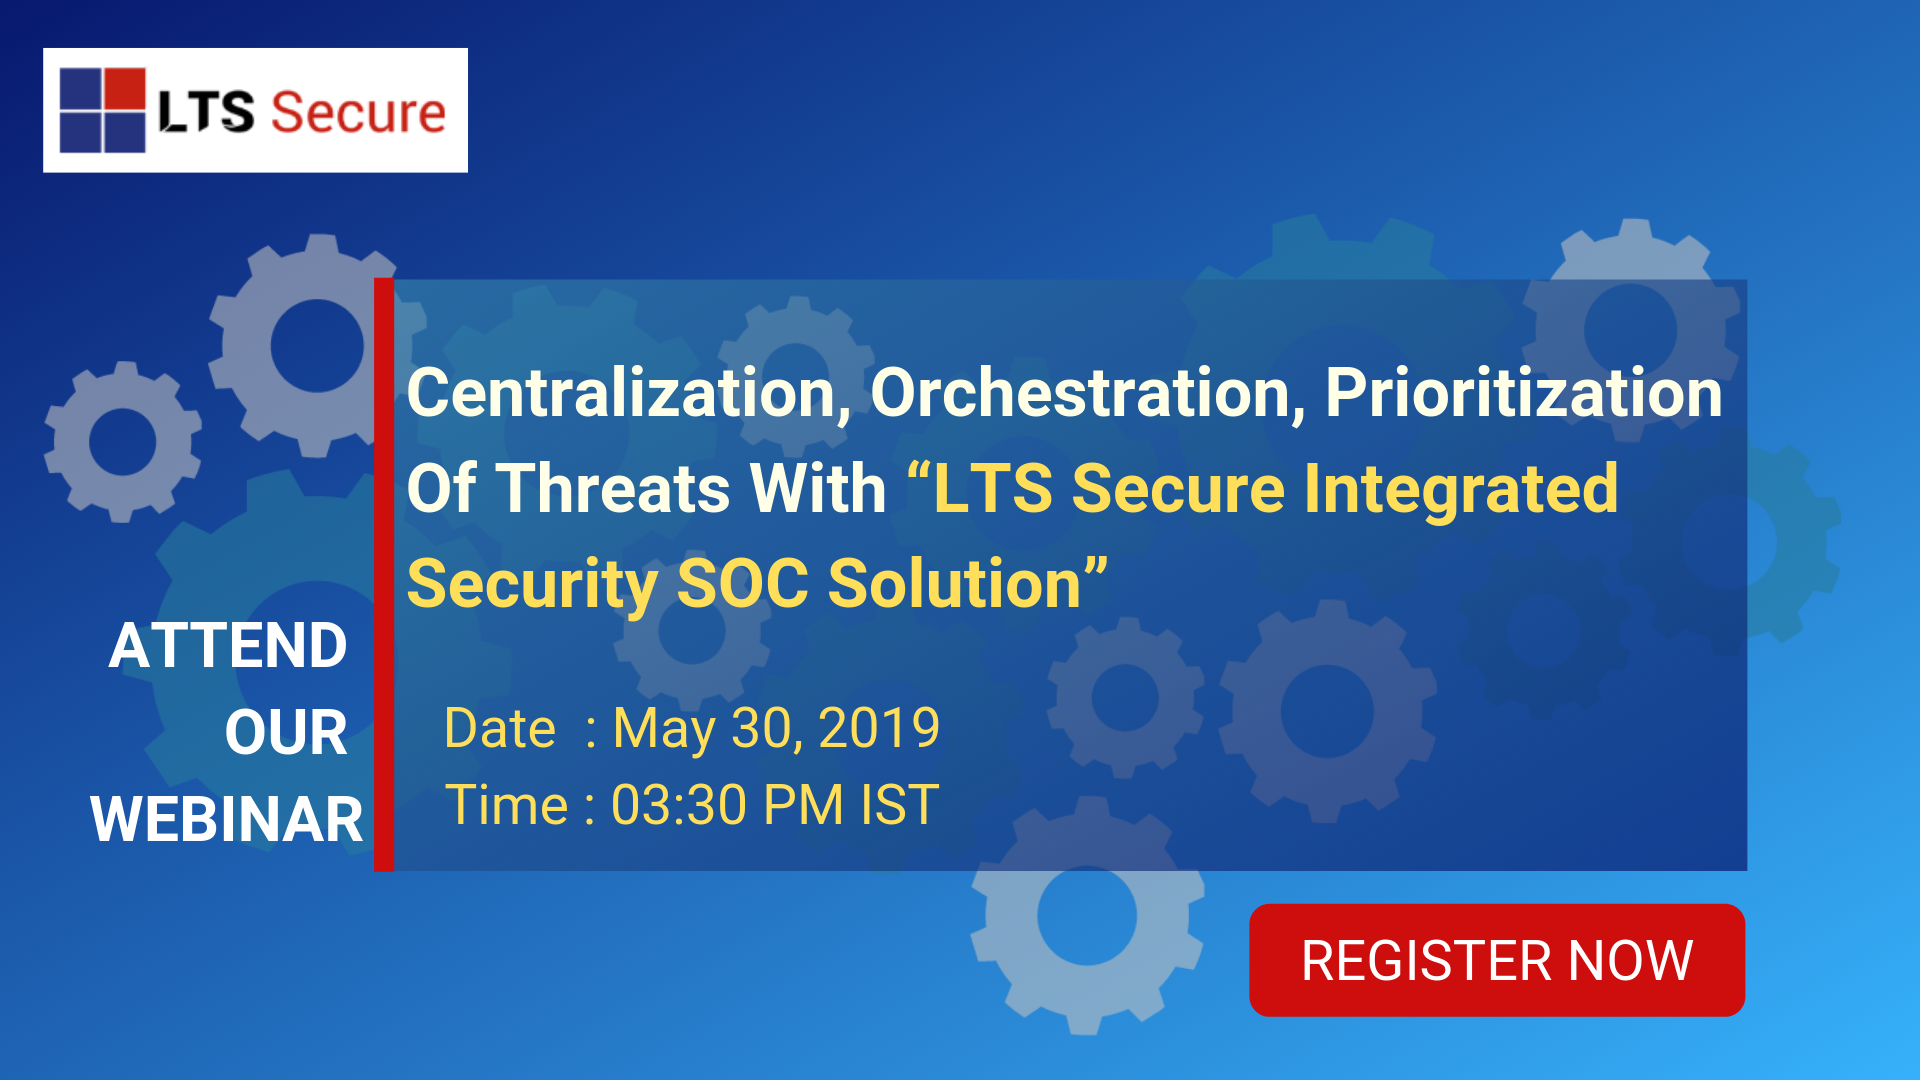 Centralization, Orchestration, Prioritization Of Threats With “LTS Secure Integrated Security SOC Solution”, Pune, Maharashtra, India